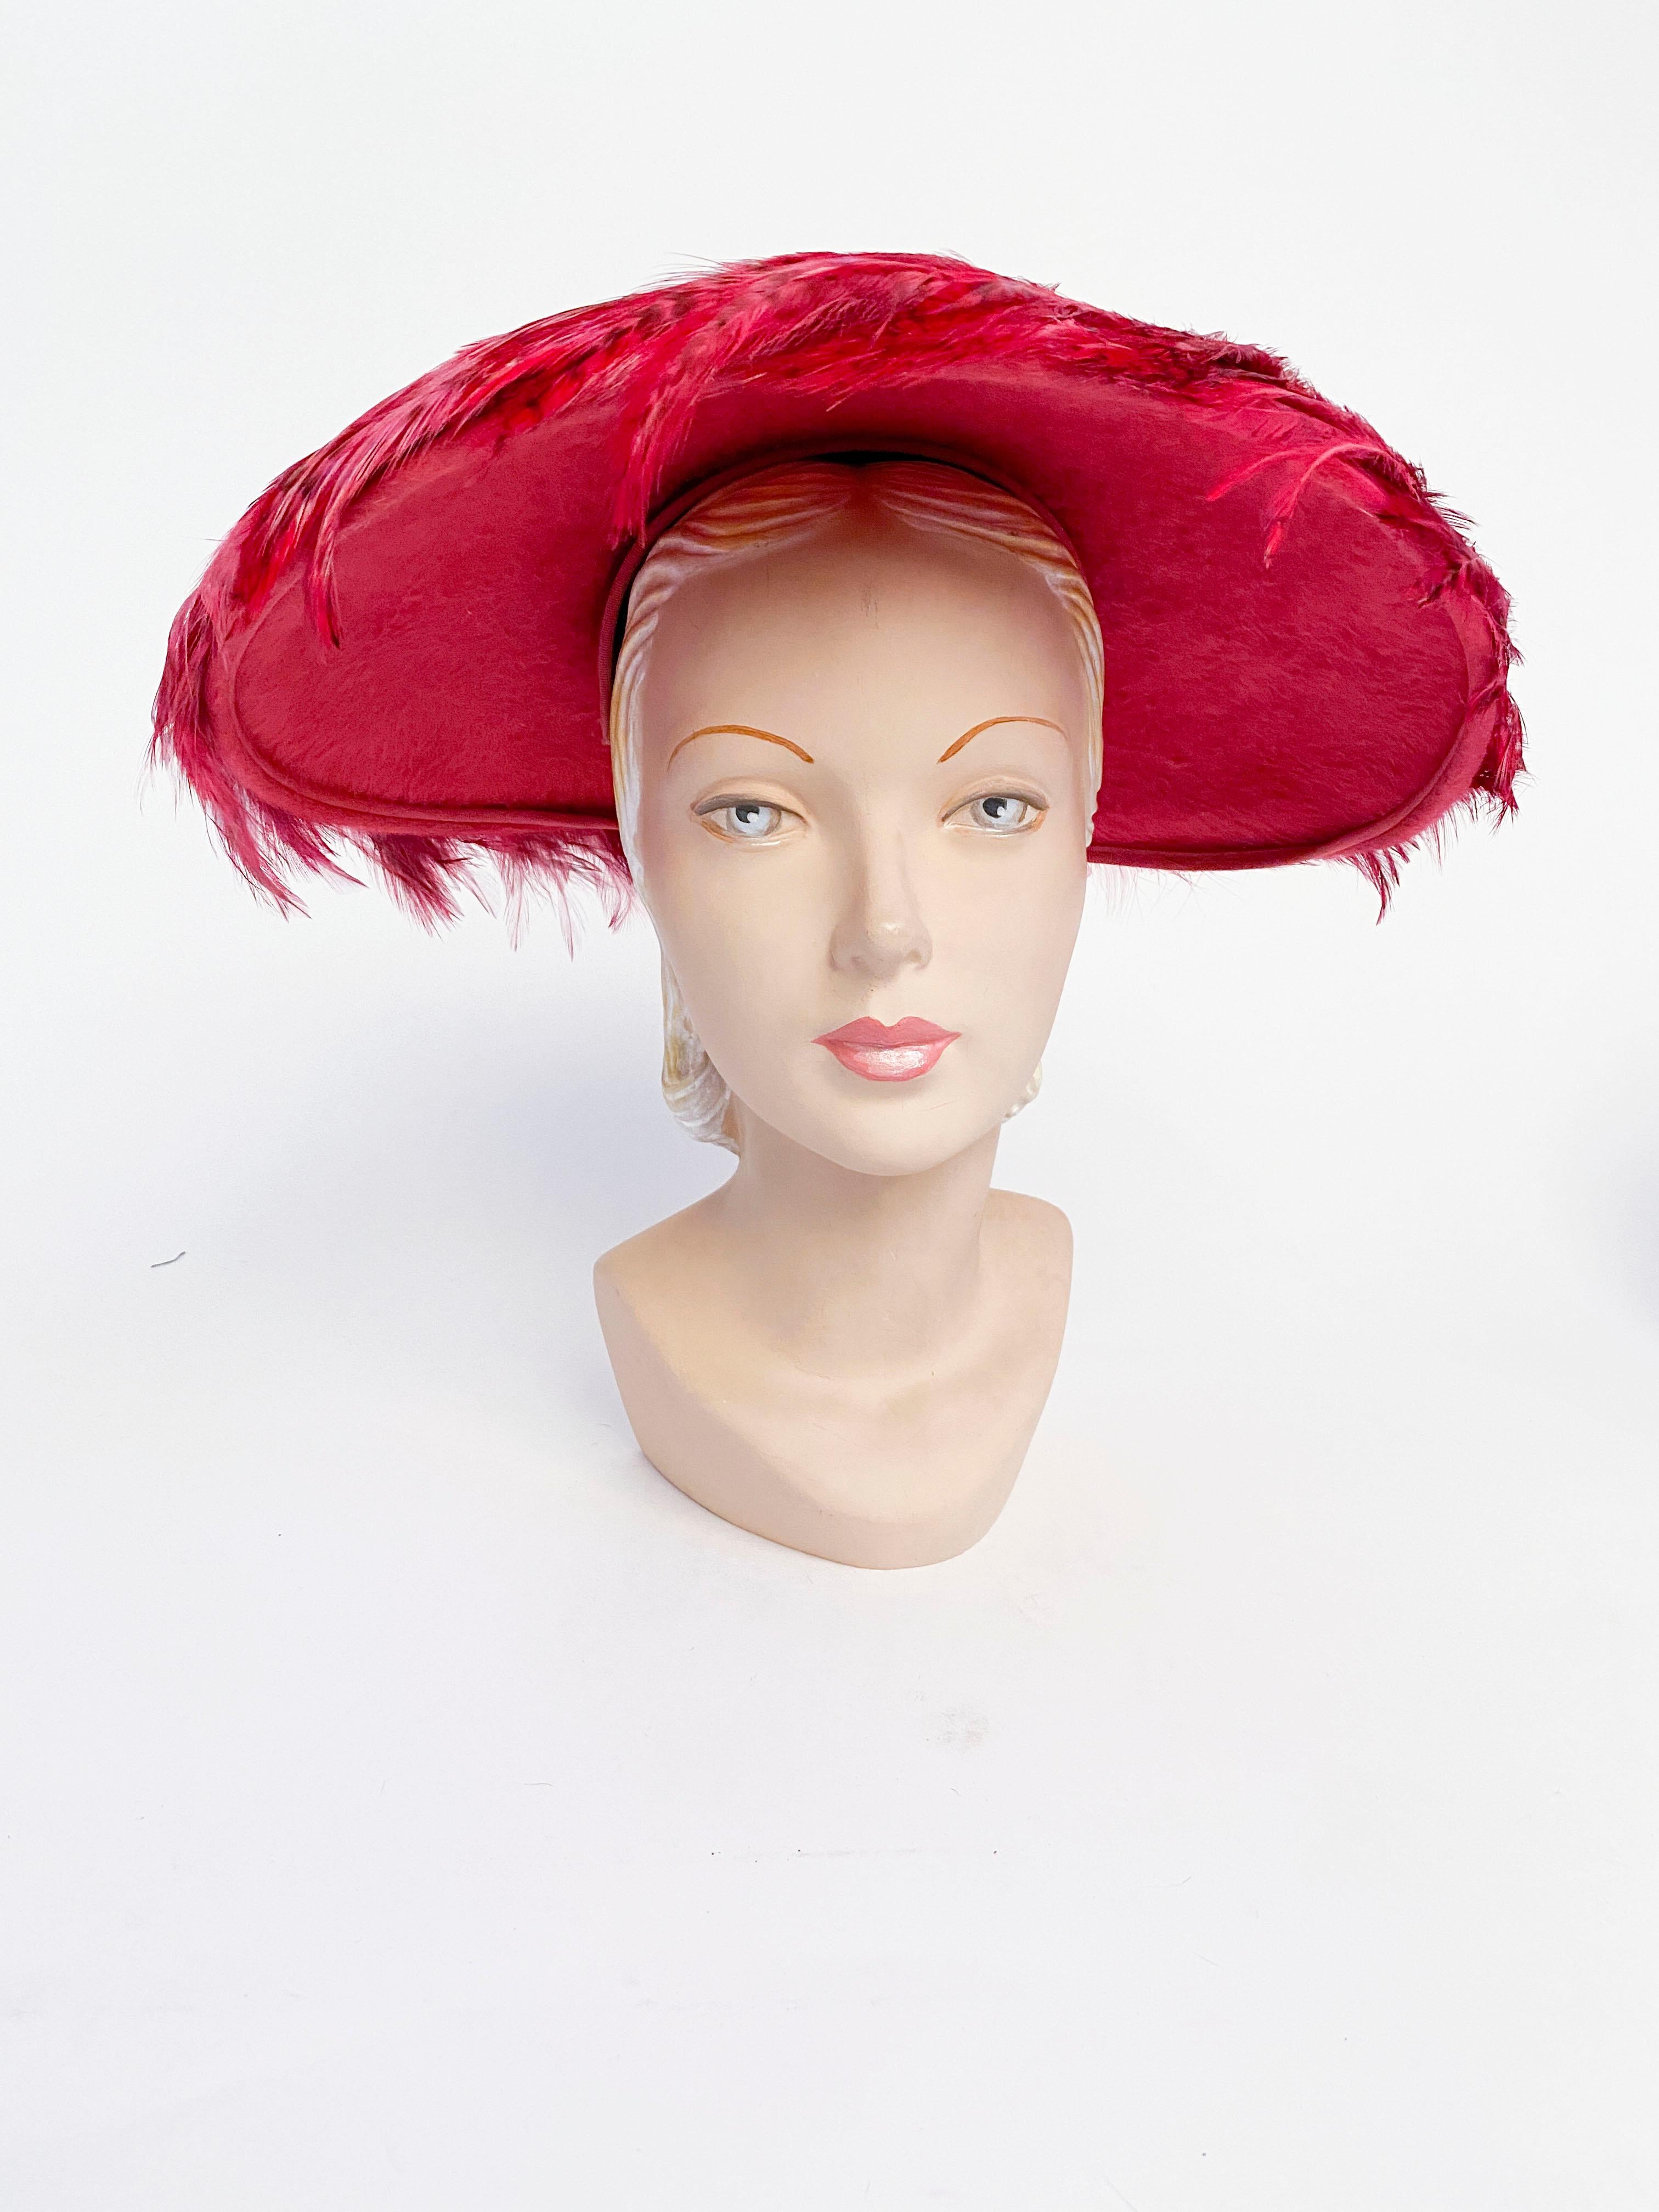 1950s hot pink and majenta wide brimmed picture hat with layered feathers in multi-tones of pink. This hat is handmade and original with custom dyed pheasant feathers on a rose pink dyed beaver fur felt.